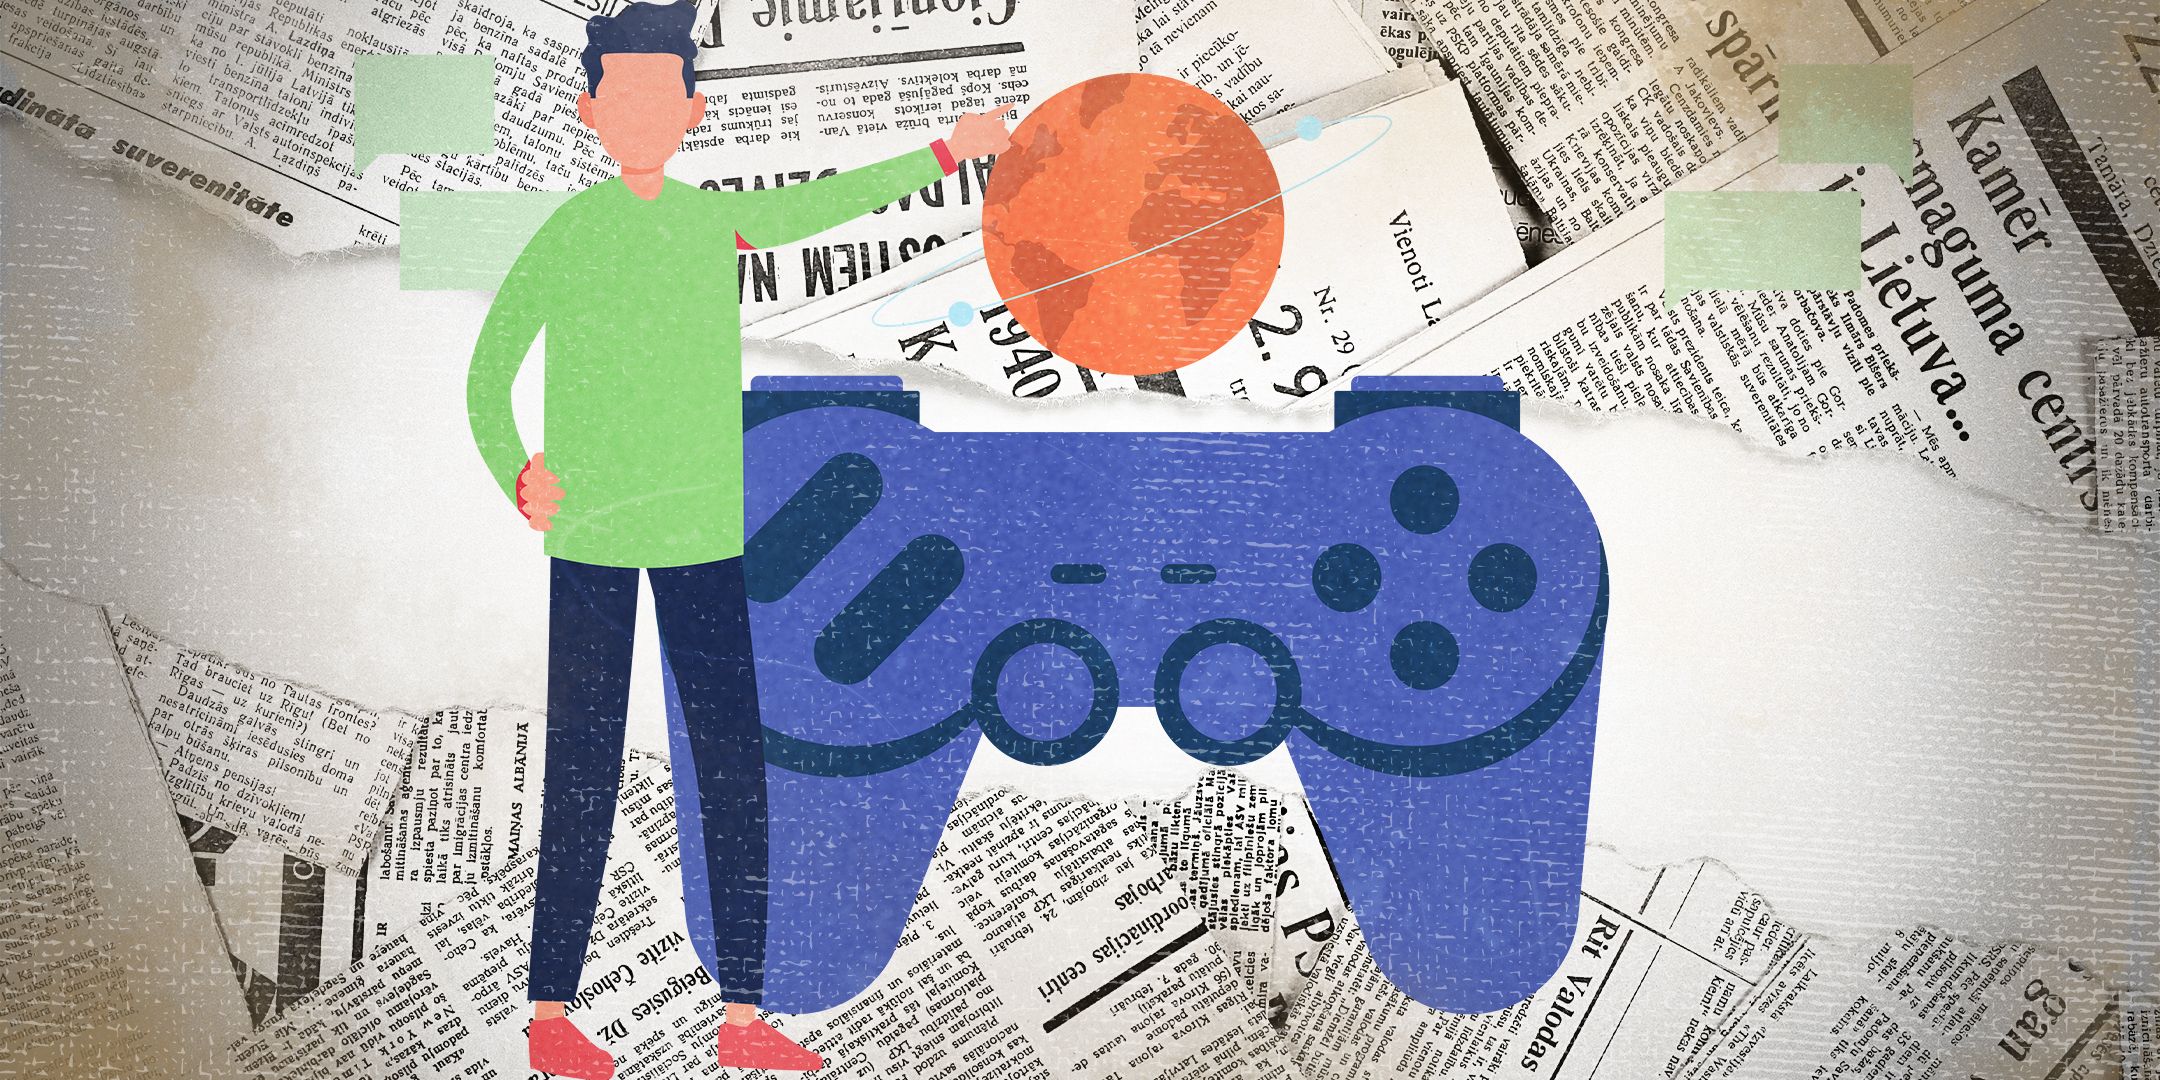 A person standing in front of a game controller with a globe above it, and newspapers in the background.